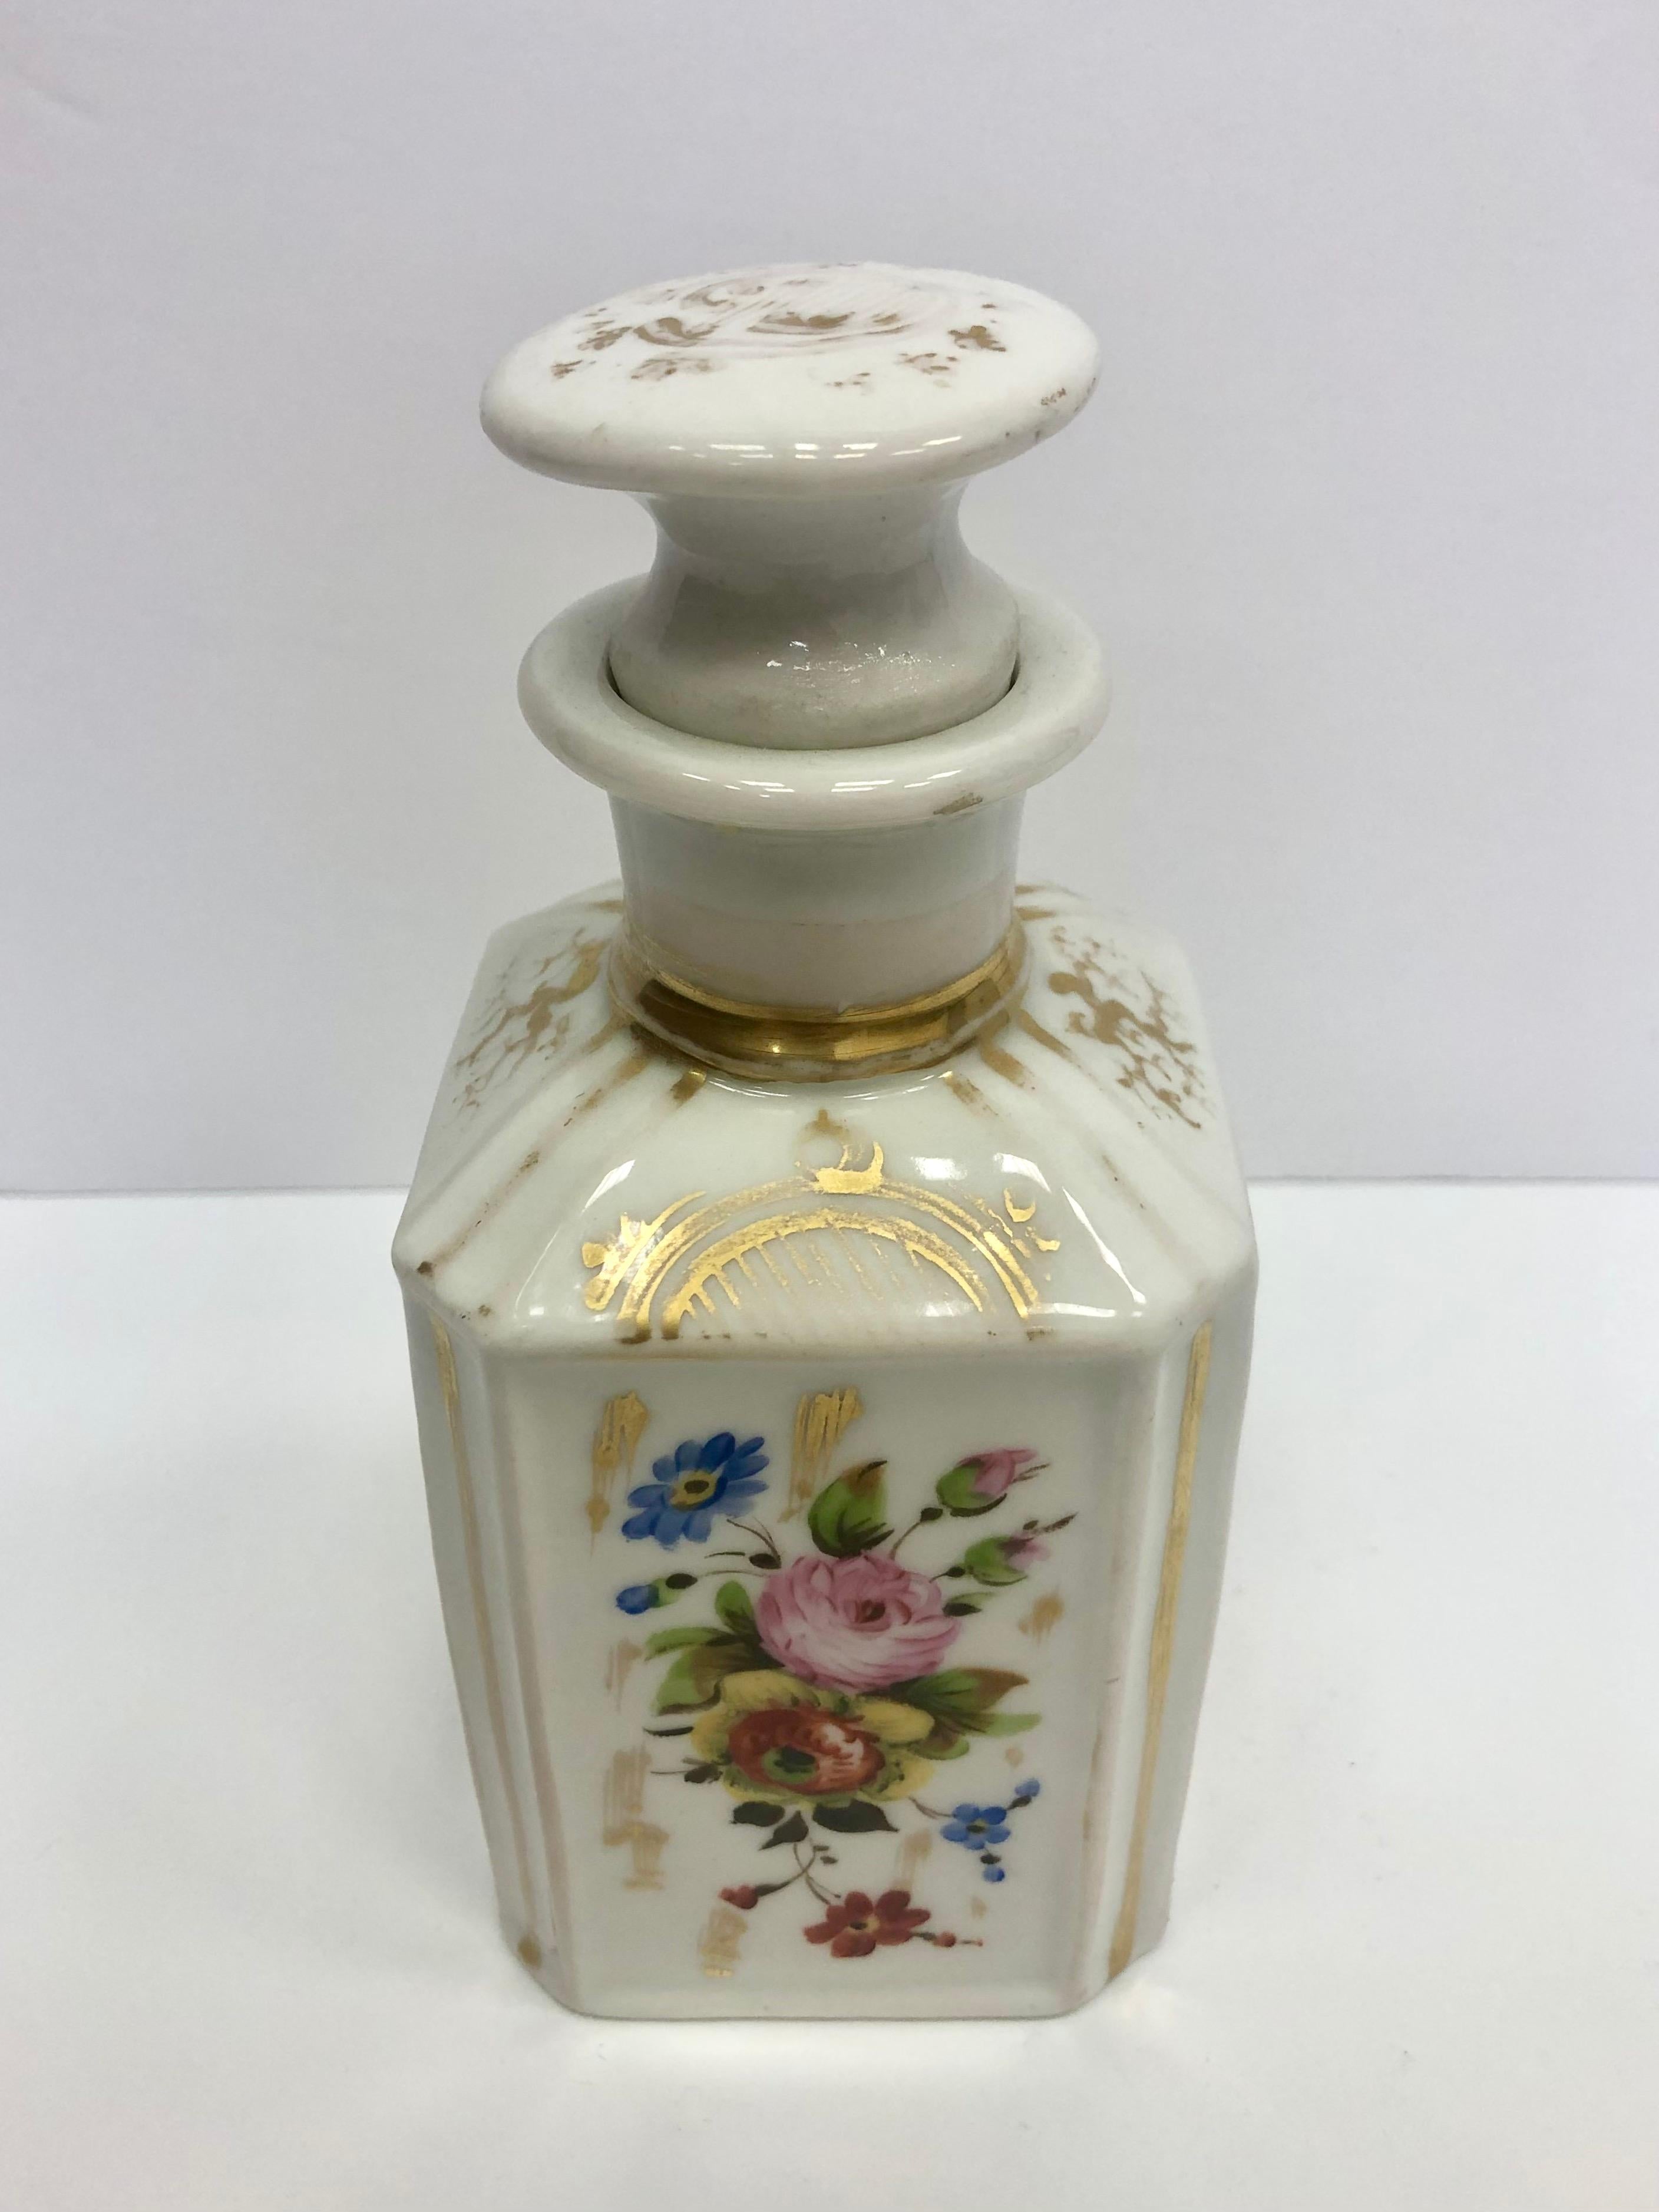 Beautiful Victorian porcelain tea caddy with hand painted floral design.